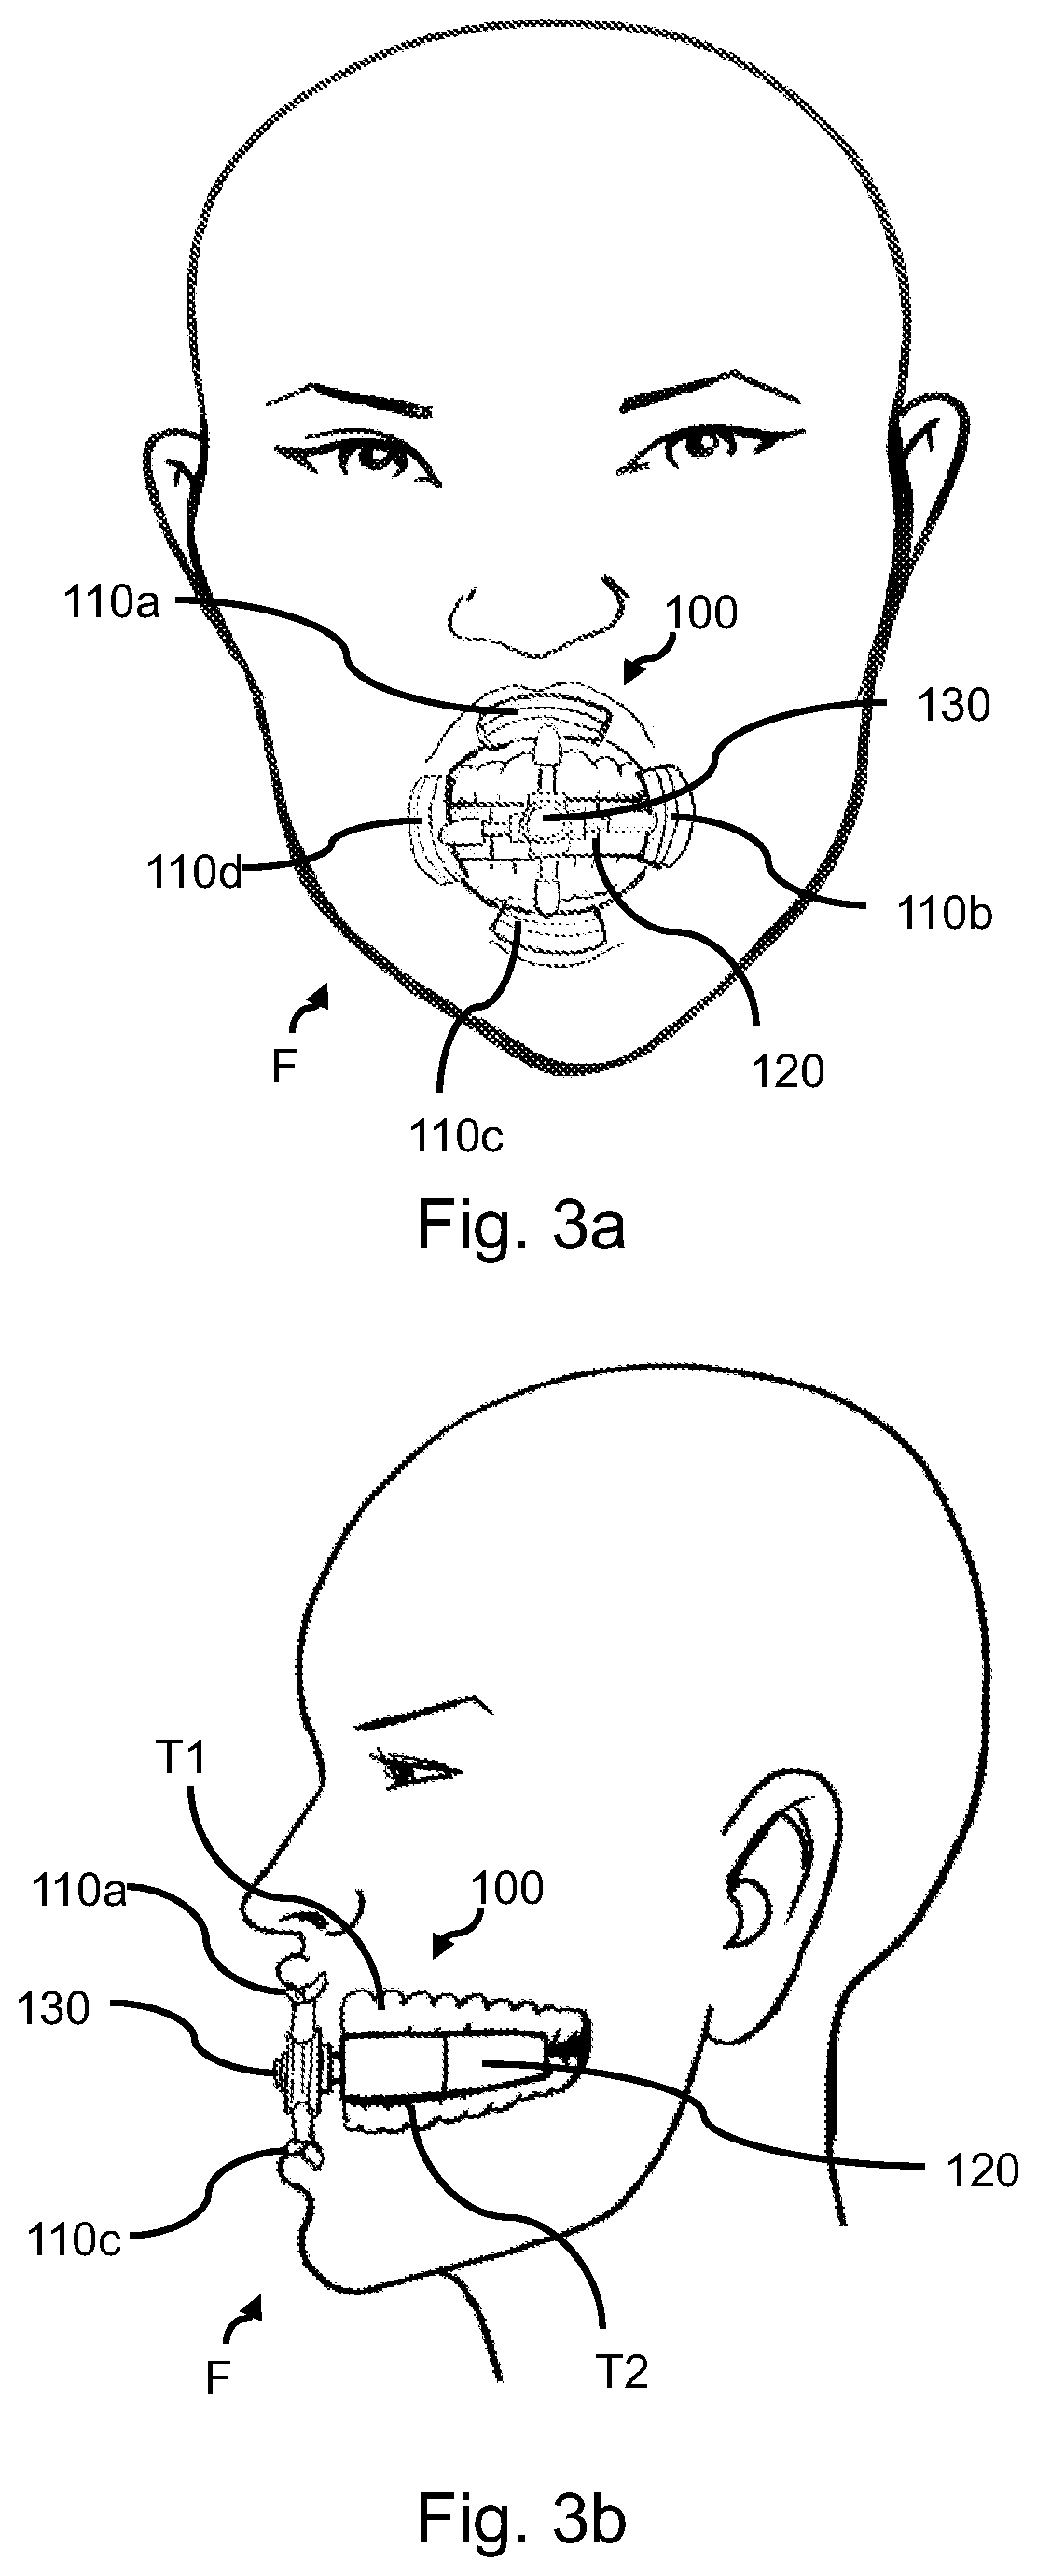 Apparatus for strengthening facial bones and muscle in cosmetic, stroke, and idiopathic facial paralysis patients and methods of use